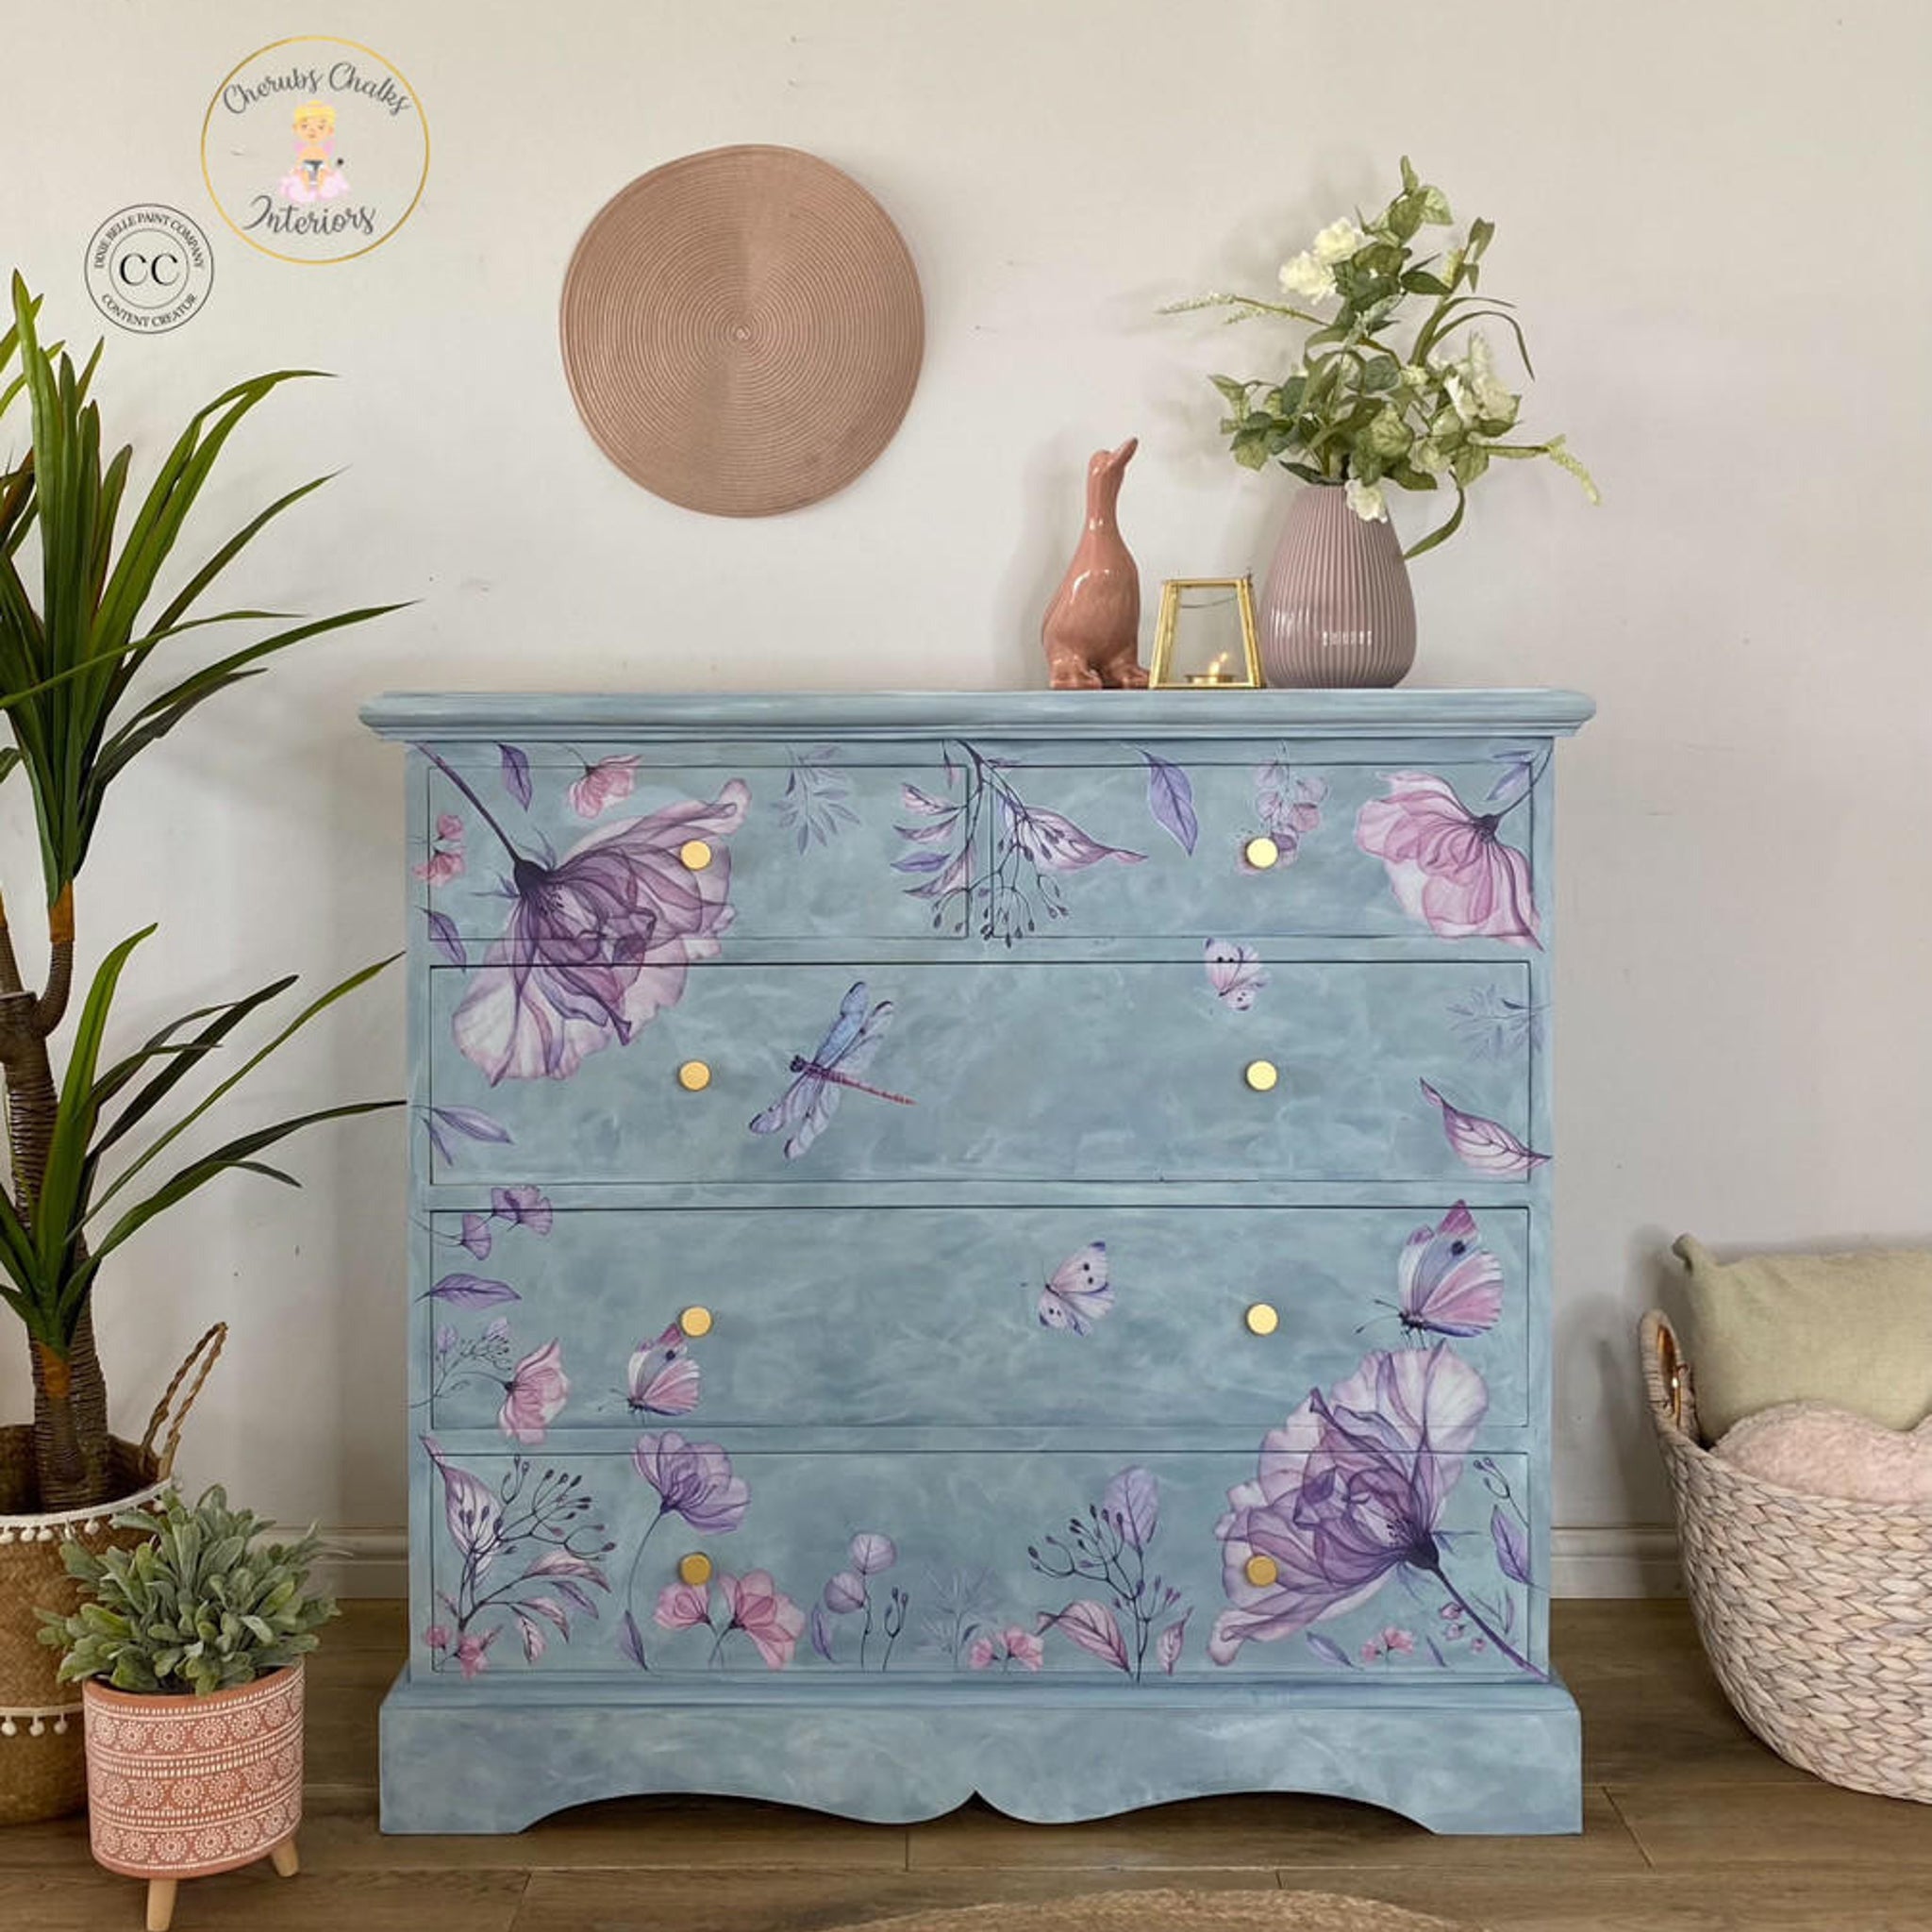 A dresser refurbished by Cherub's Chalks Interiors, a Dixie Belle Paint Company Content Creator, is painted a blended light blue and features the Translucent Garden Transfer on the front.